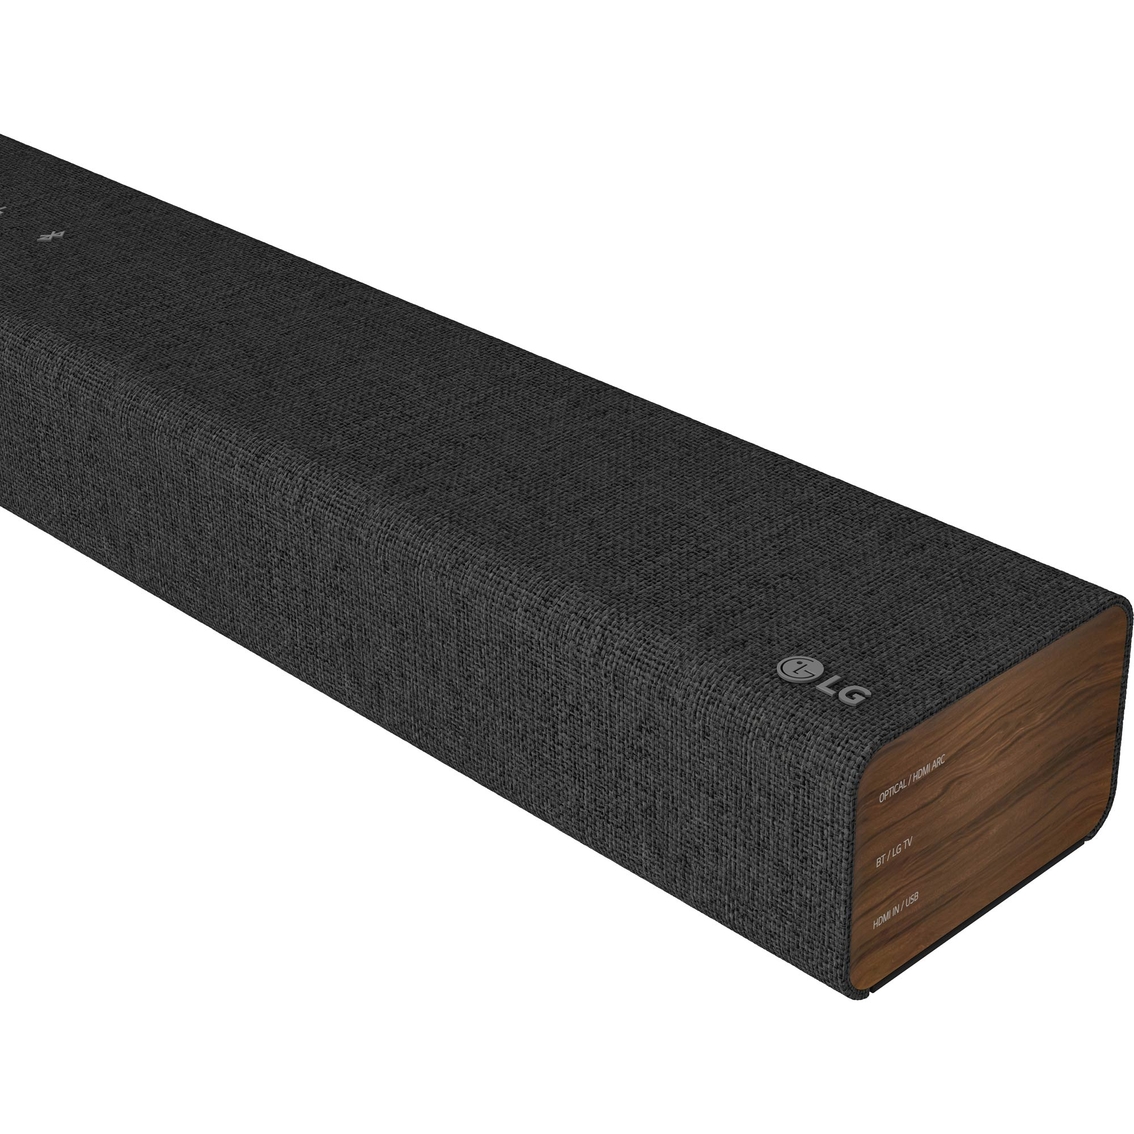 LG SP2 2.1 Channel 100W Sound Bar with Bluetooth and Built-In Subwoofer - Image 8 of 8